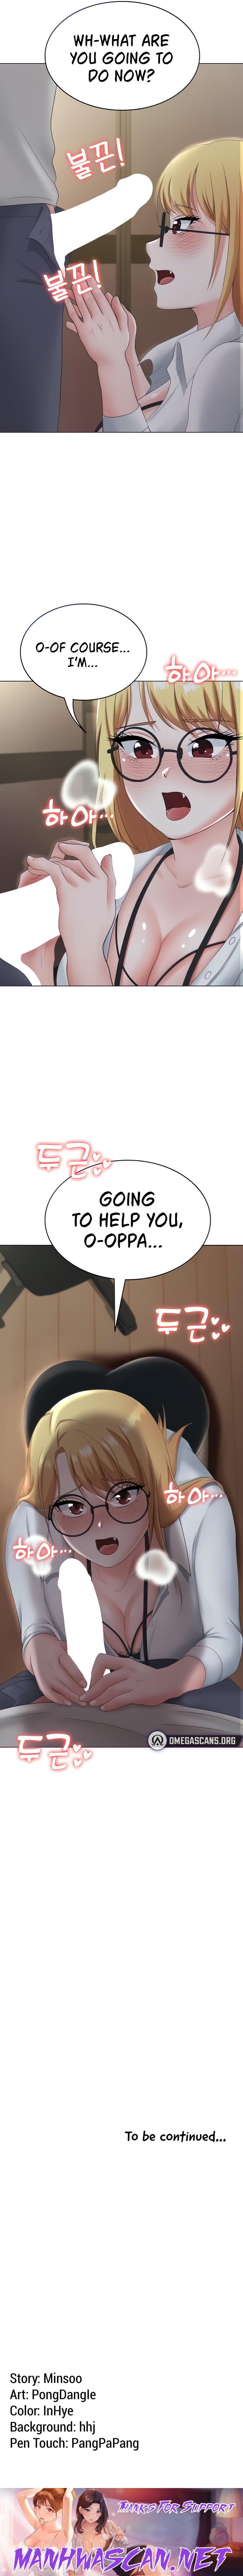 Seoul Kids These Days - Chapter 10 Page 19